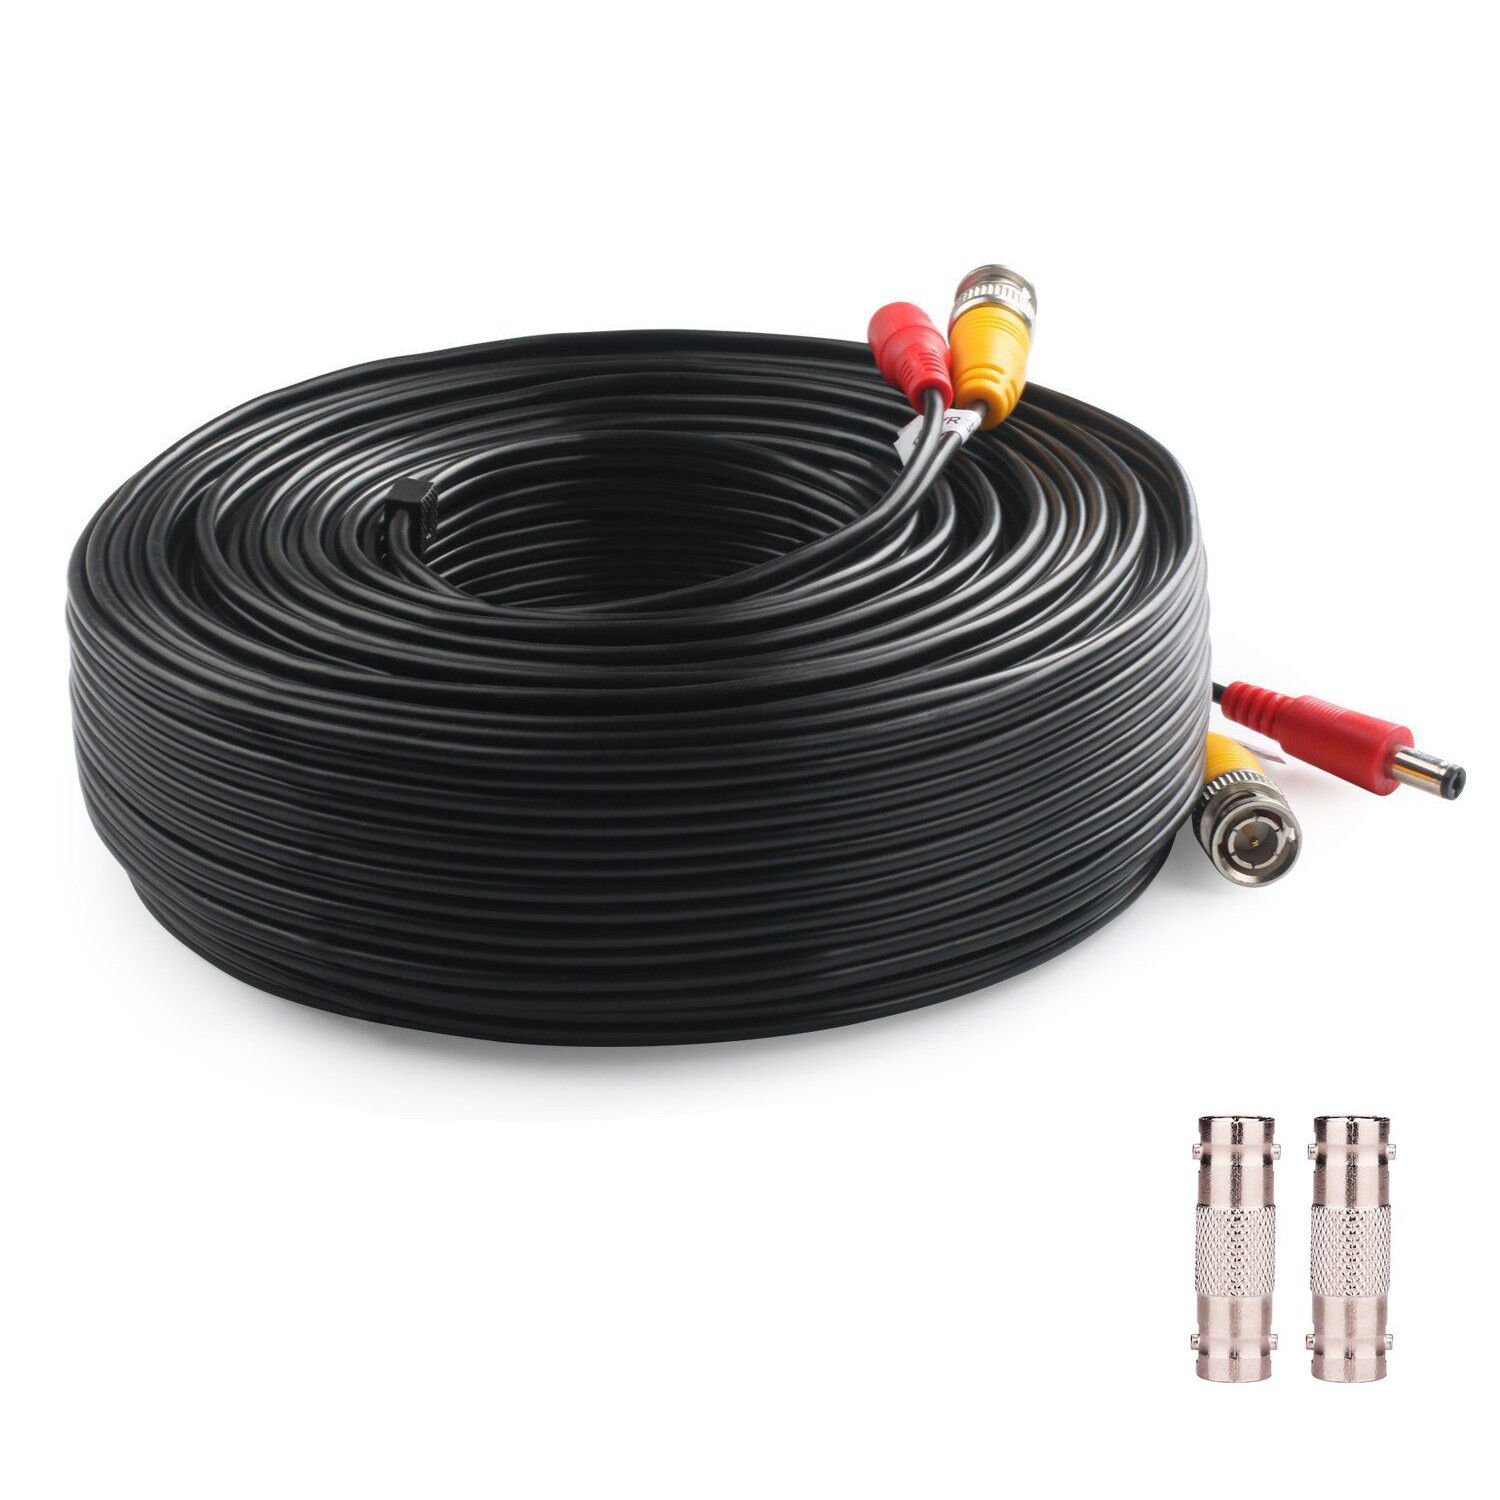 150ft Power Video Security Camera Cable BNC Extension Wire Cord for All CCTV DVR